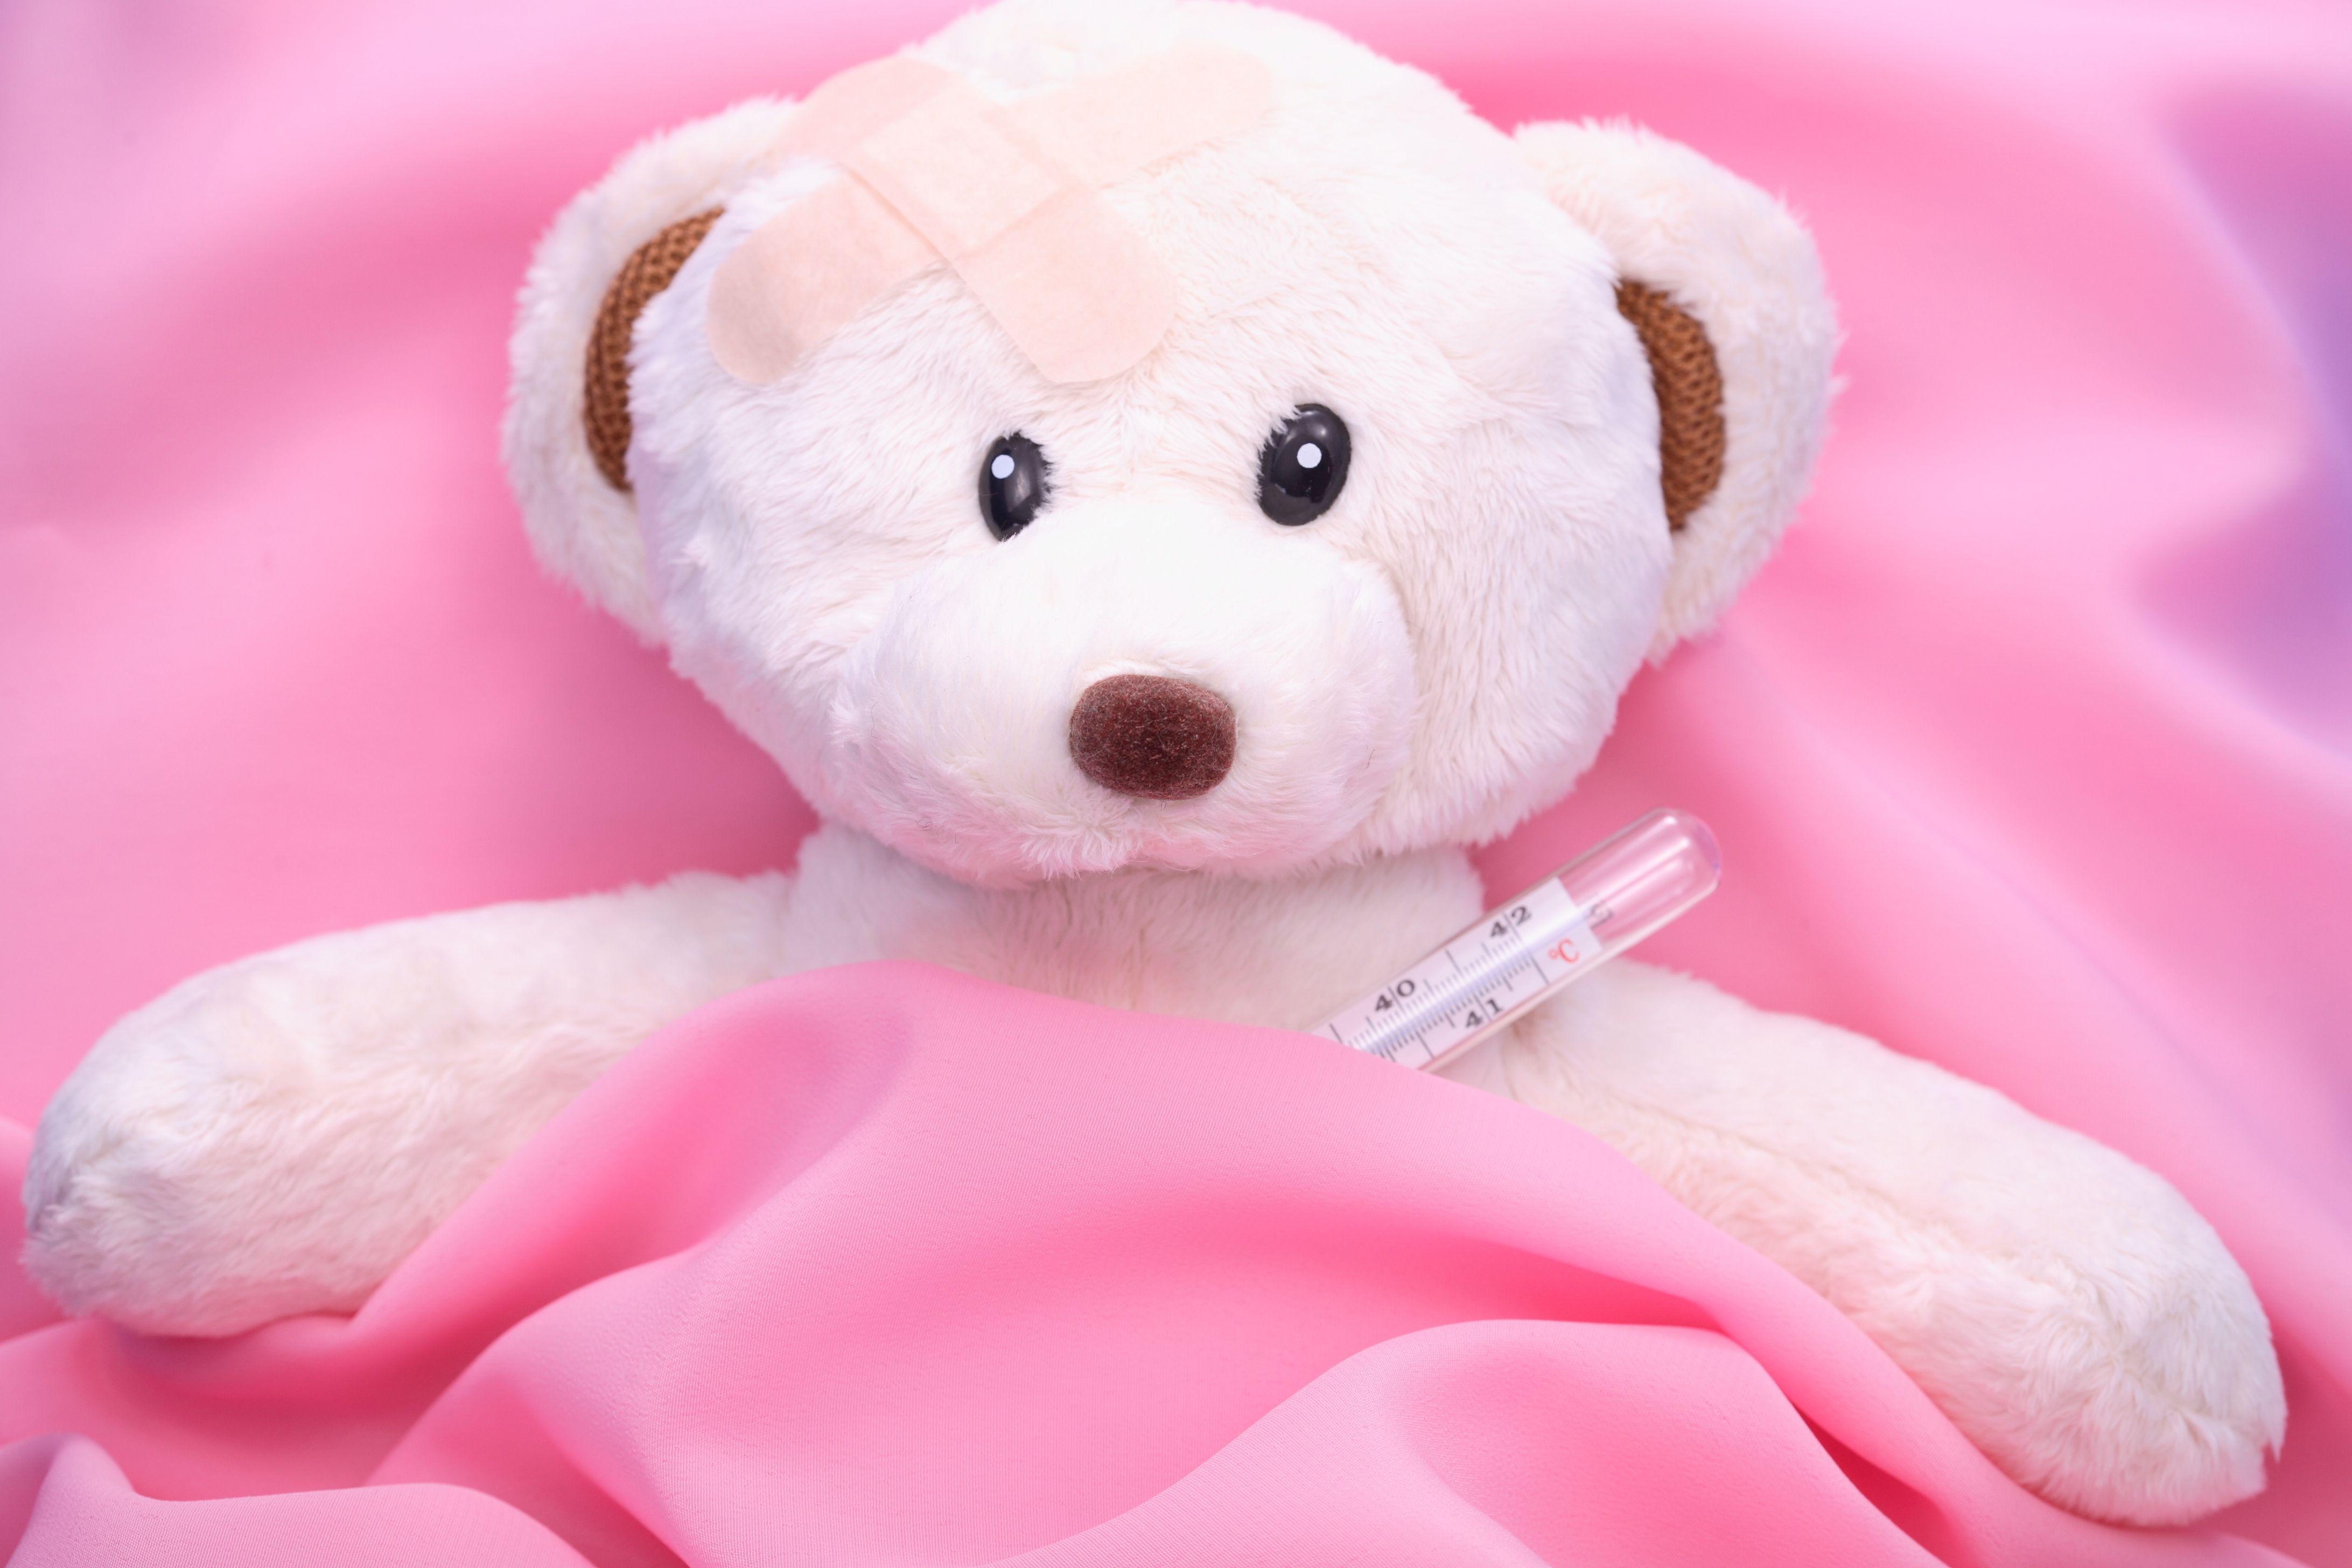 Wallpaper, Toy, teddy bear, thermometer, bed, disease 4368x2912